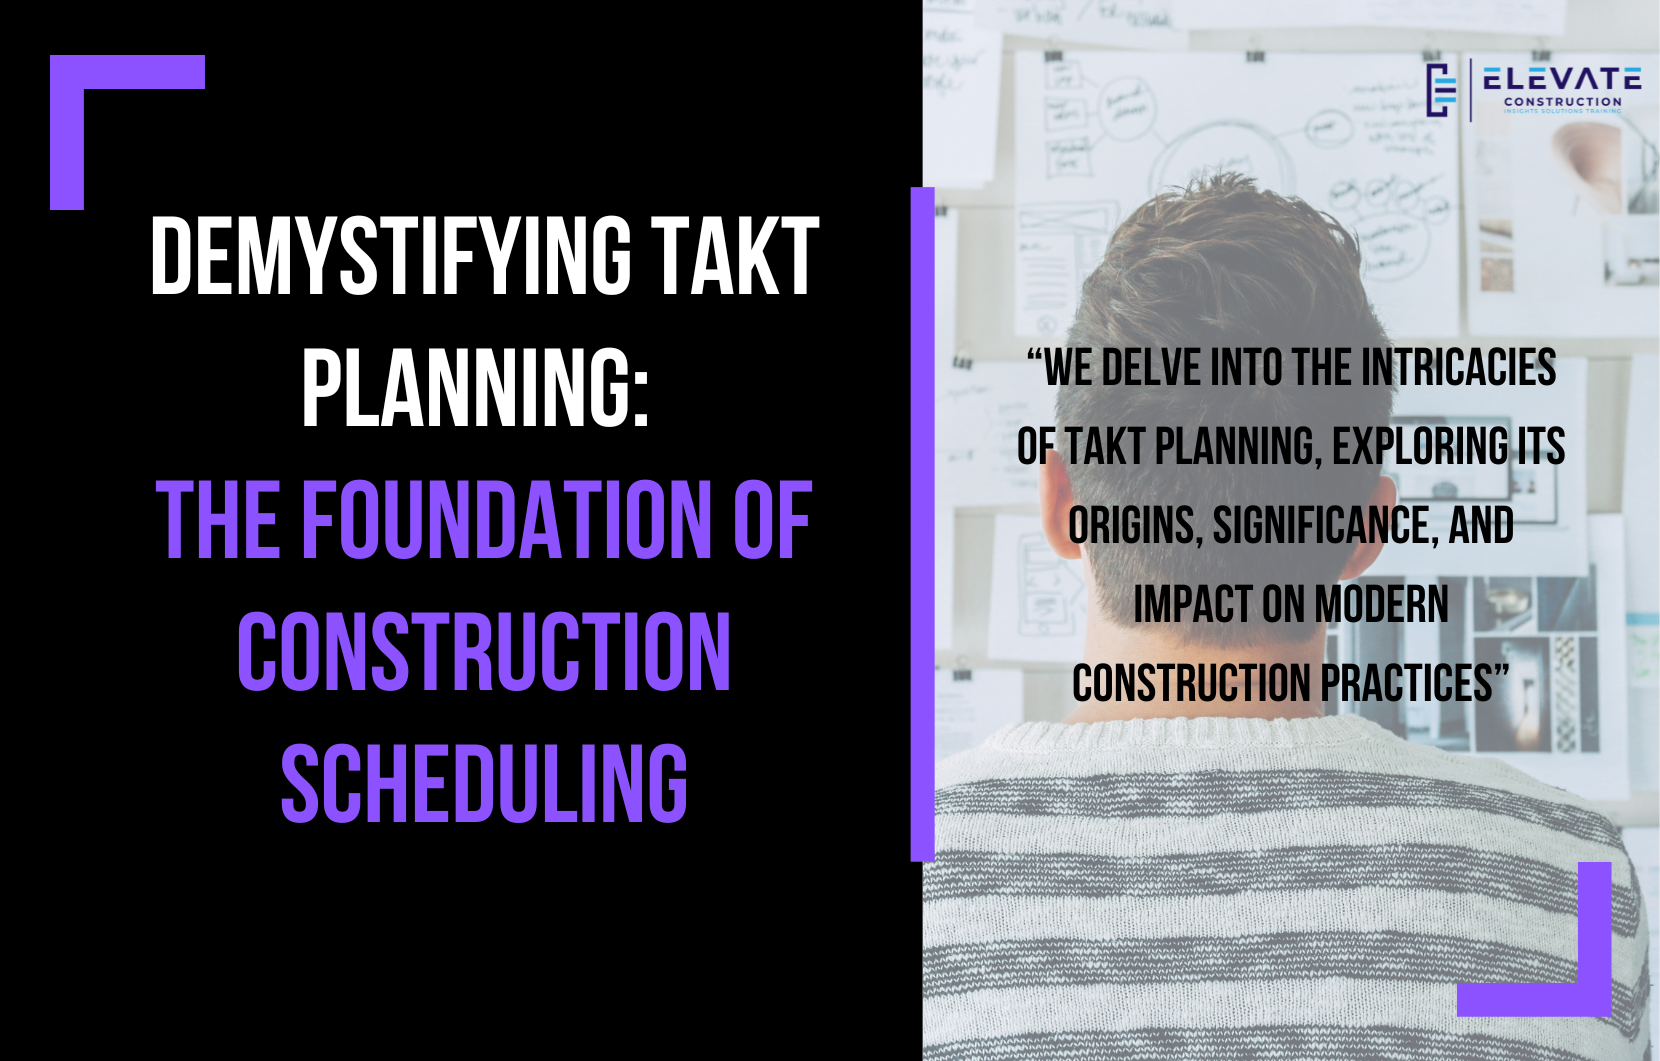 Demystifying Takt Planning: The Foundation of Construction Scheduling